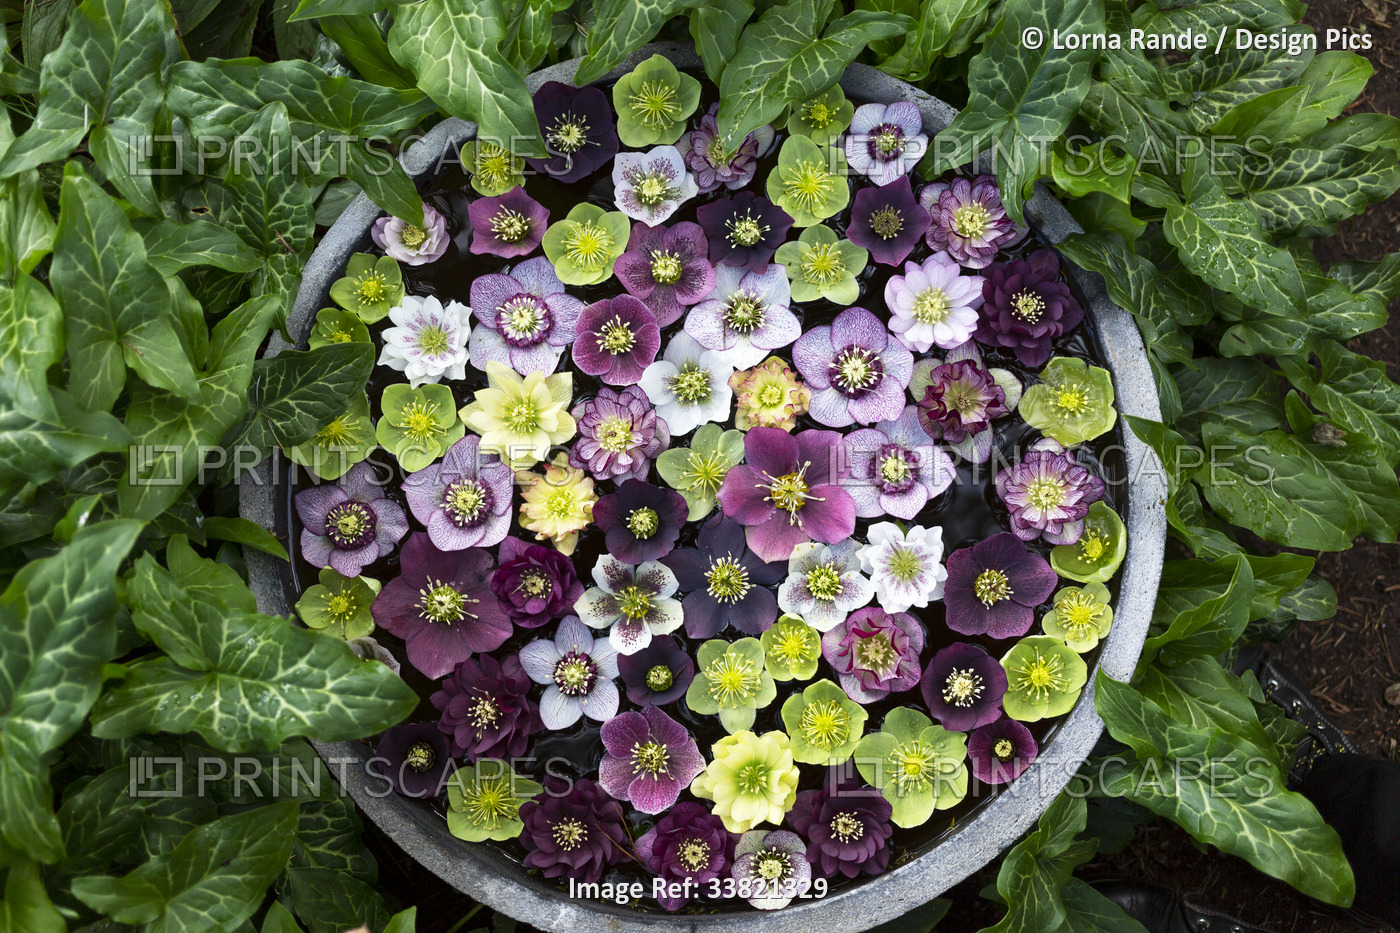 View from above of floating Hellebore blossoms in a planter surrounded by lush ...